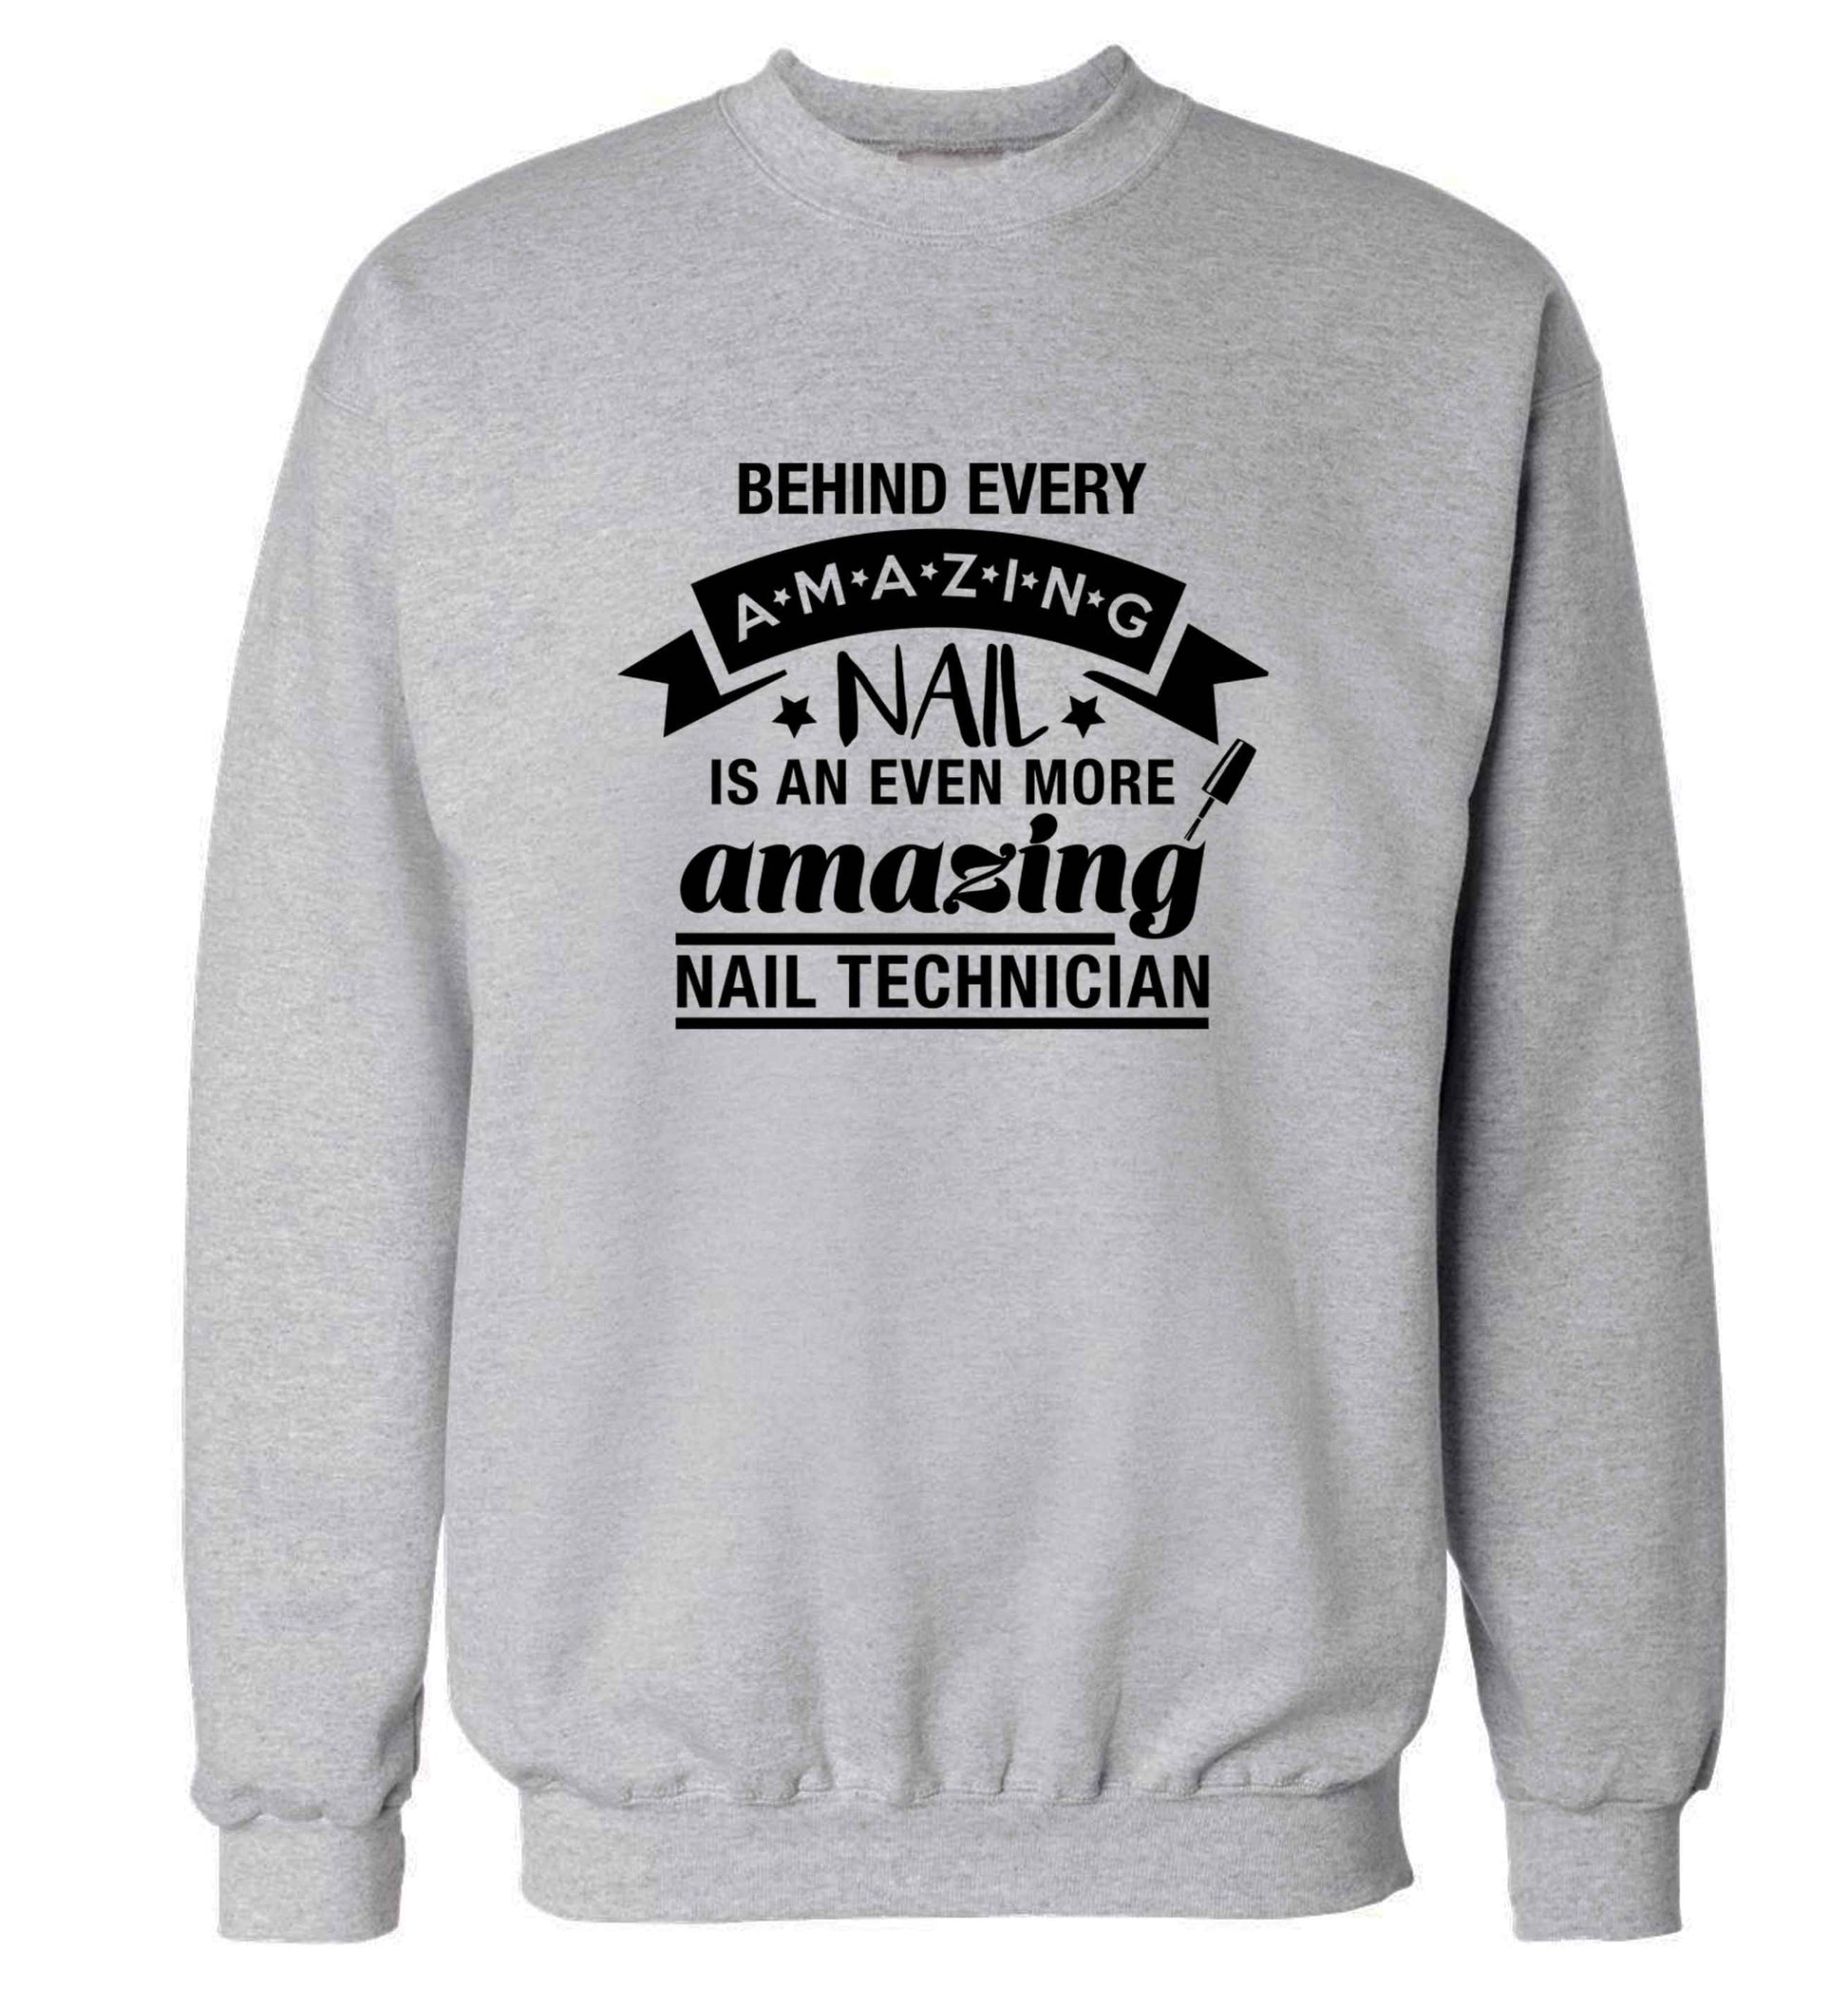 Behind every amazing nail is an even more amazing nail technician adult's unisex grey sweater 2XL